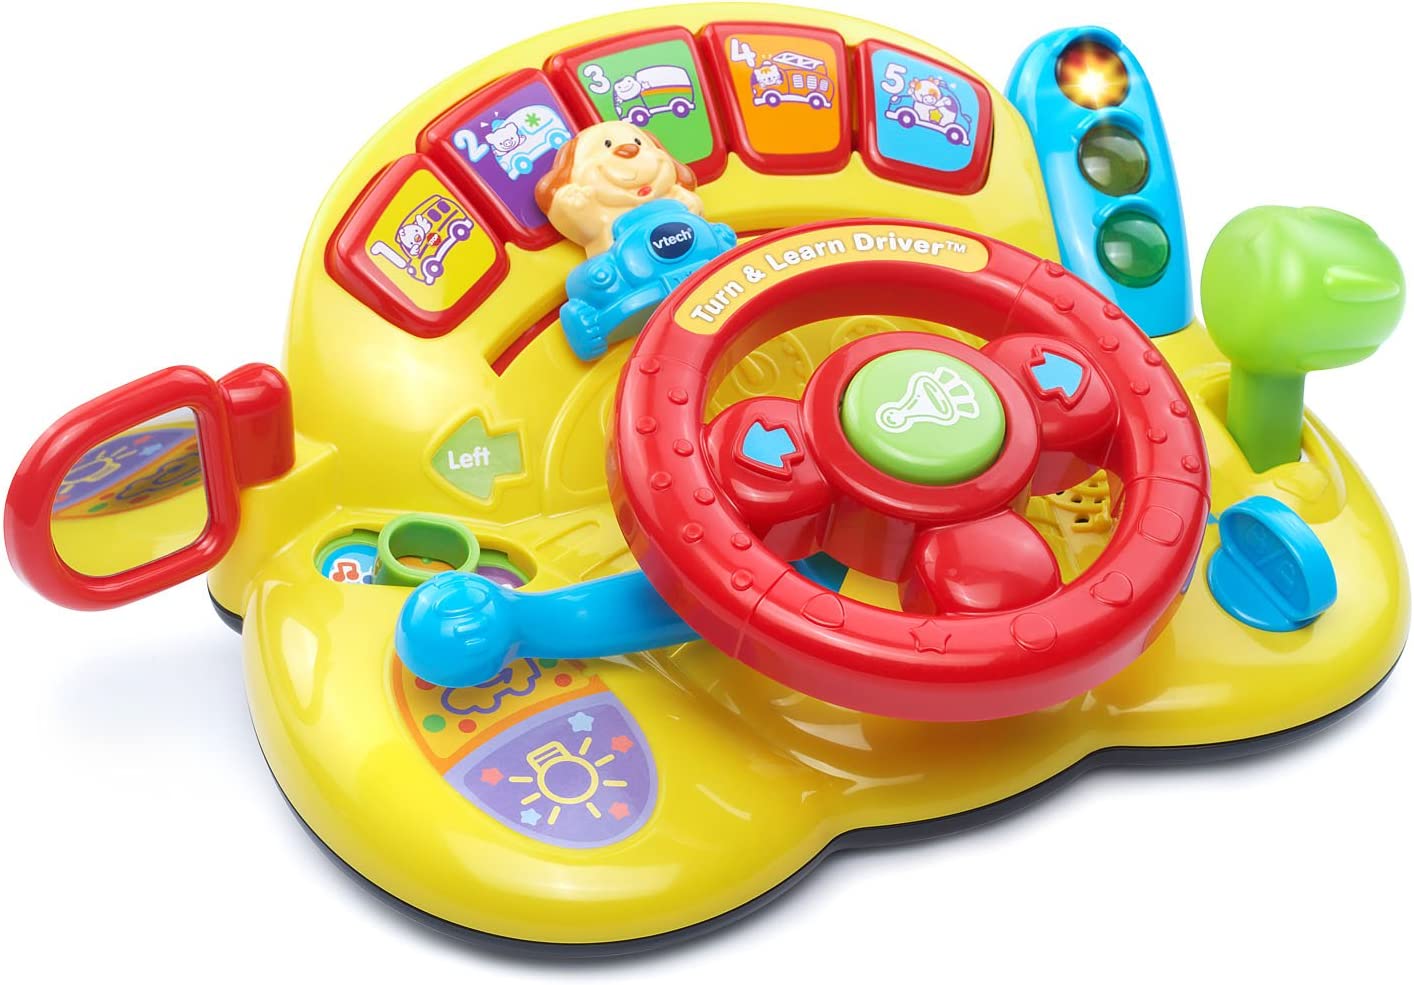 VTech Turn and Learn Driver, Yellow - Educational Toy